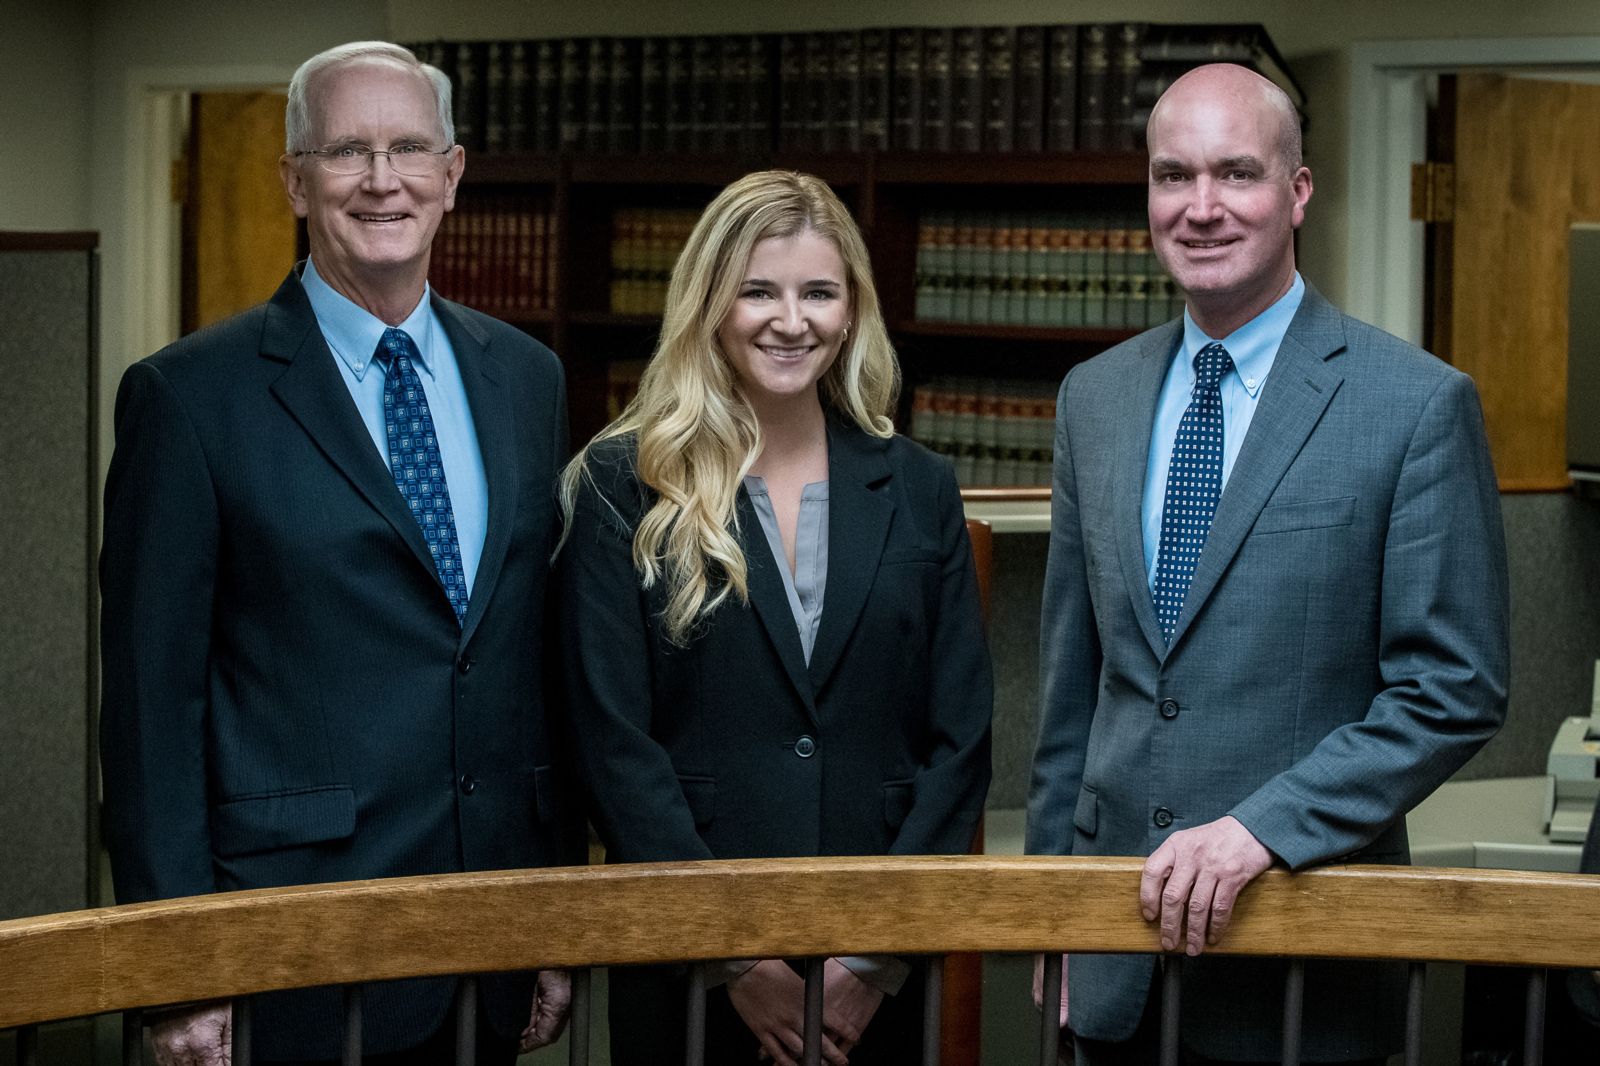 Our business attorneys in Vernon and Storrs CT